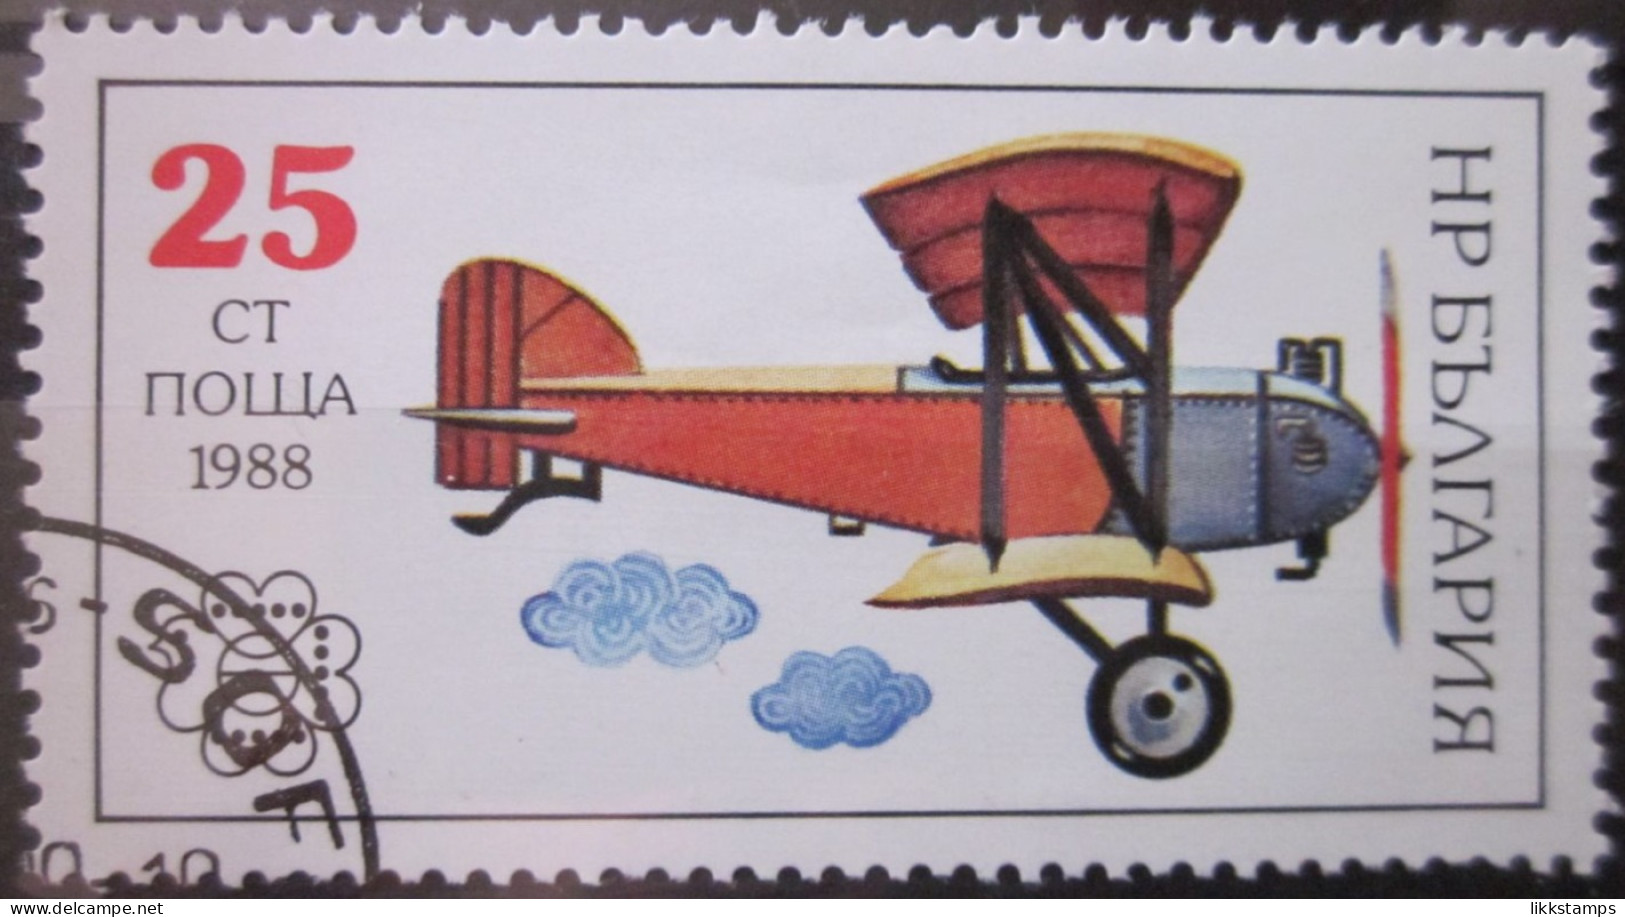 BULGARIA 1988 ~ S.G. 3582, ~ MAIL TRANSPORT. ~  VFU #02882 - Used Stamps